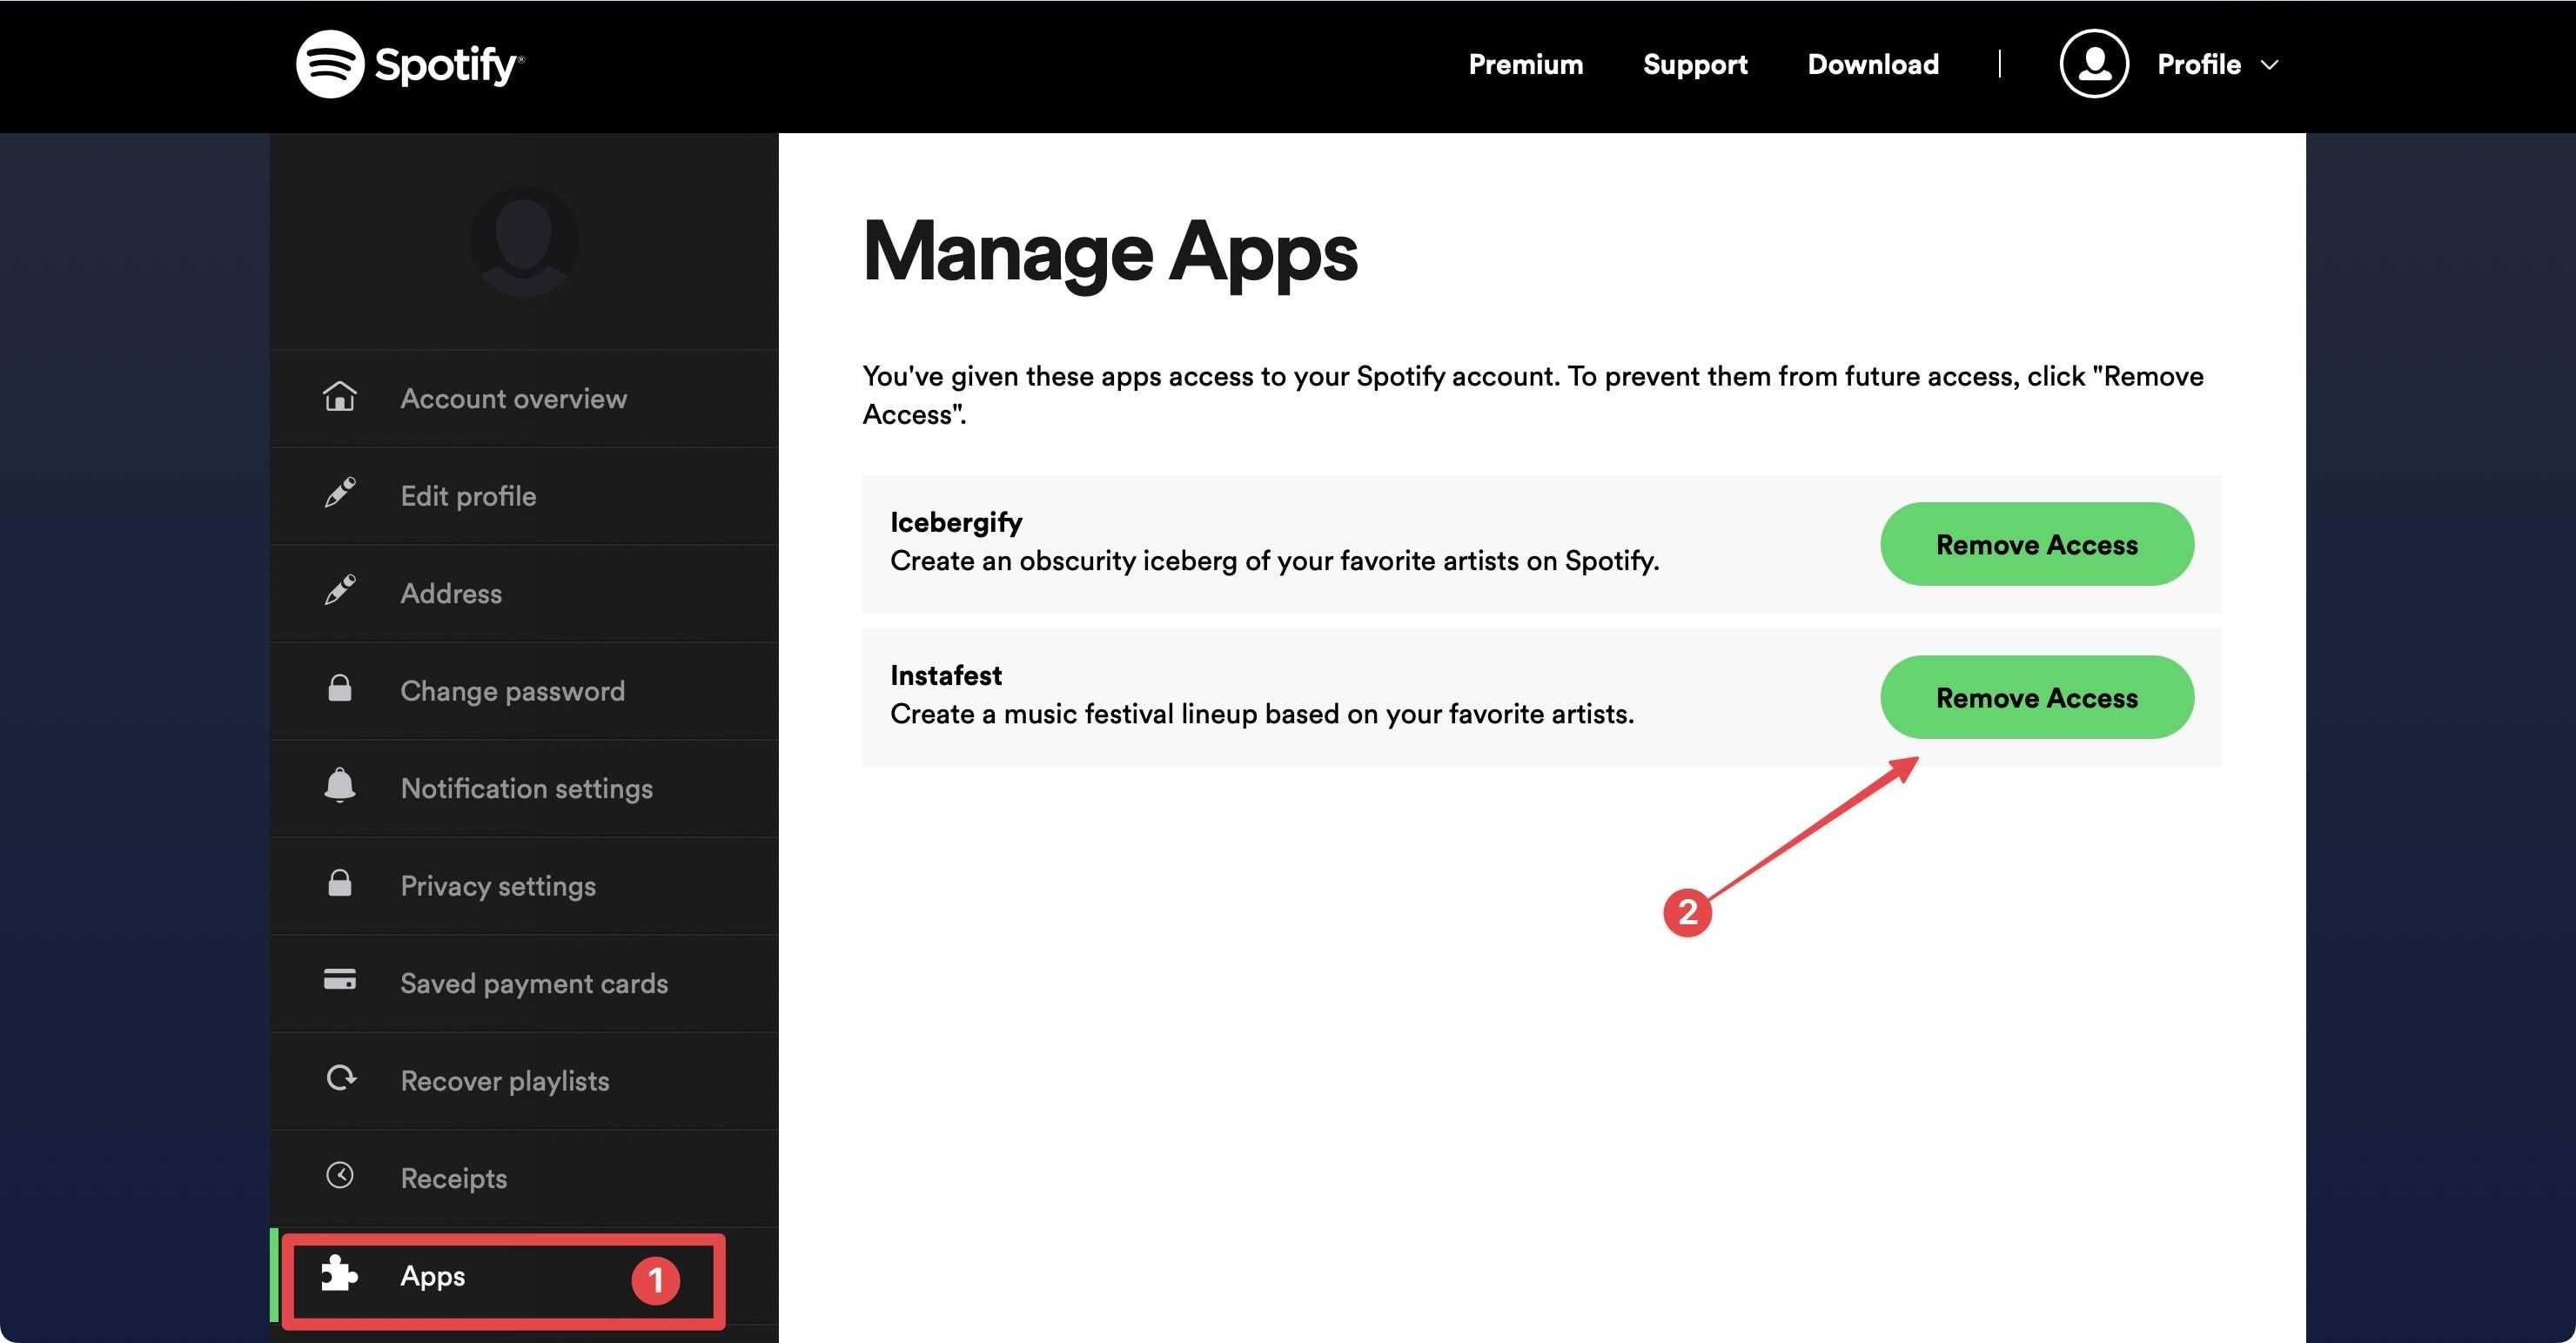 Spotify web app screenshot showing manage apps section